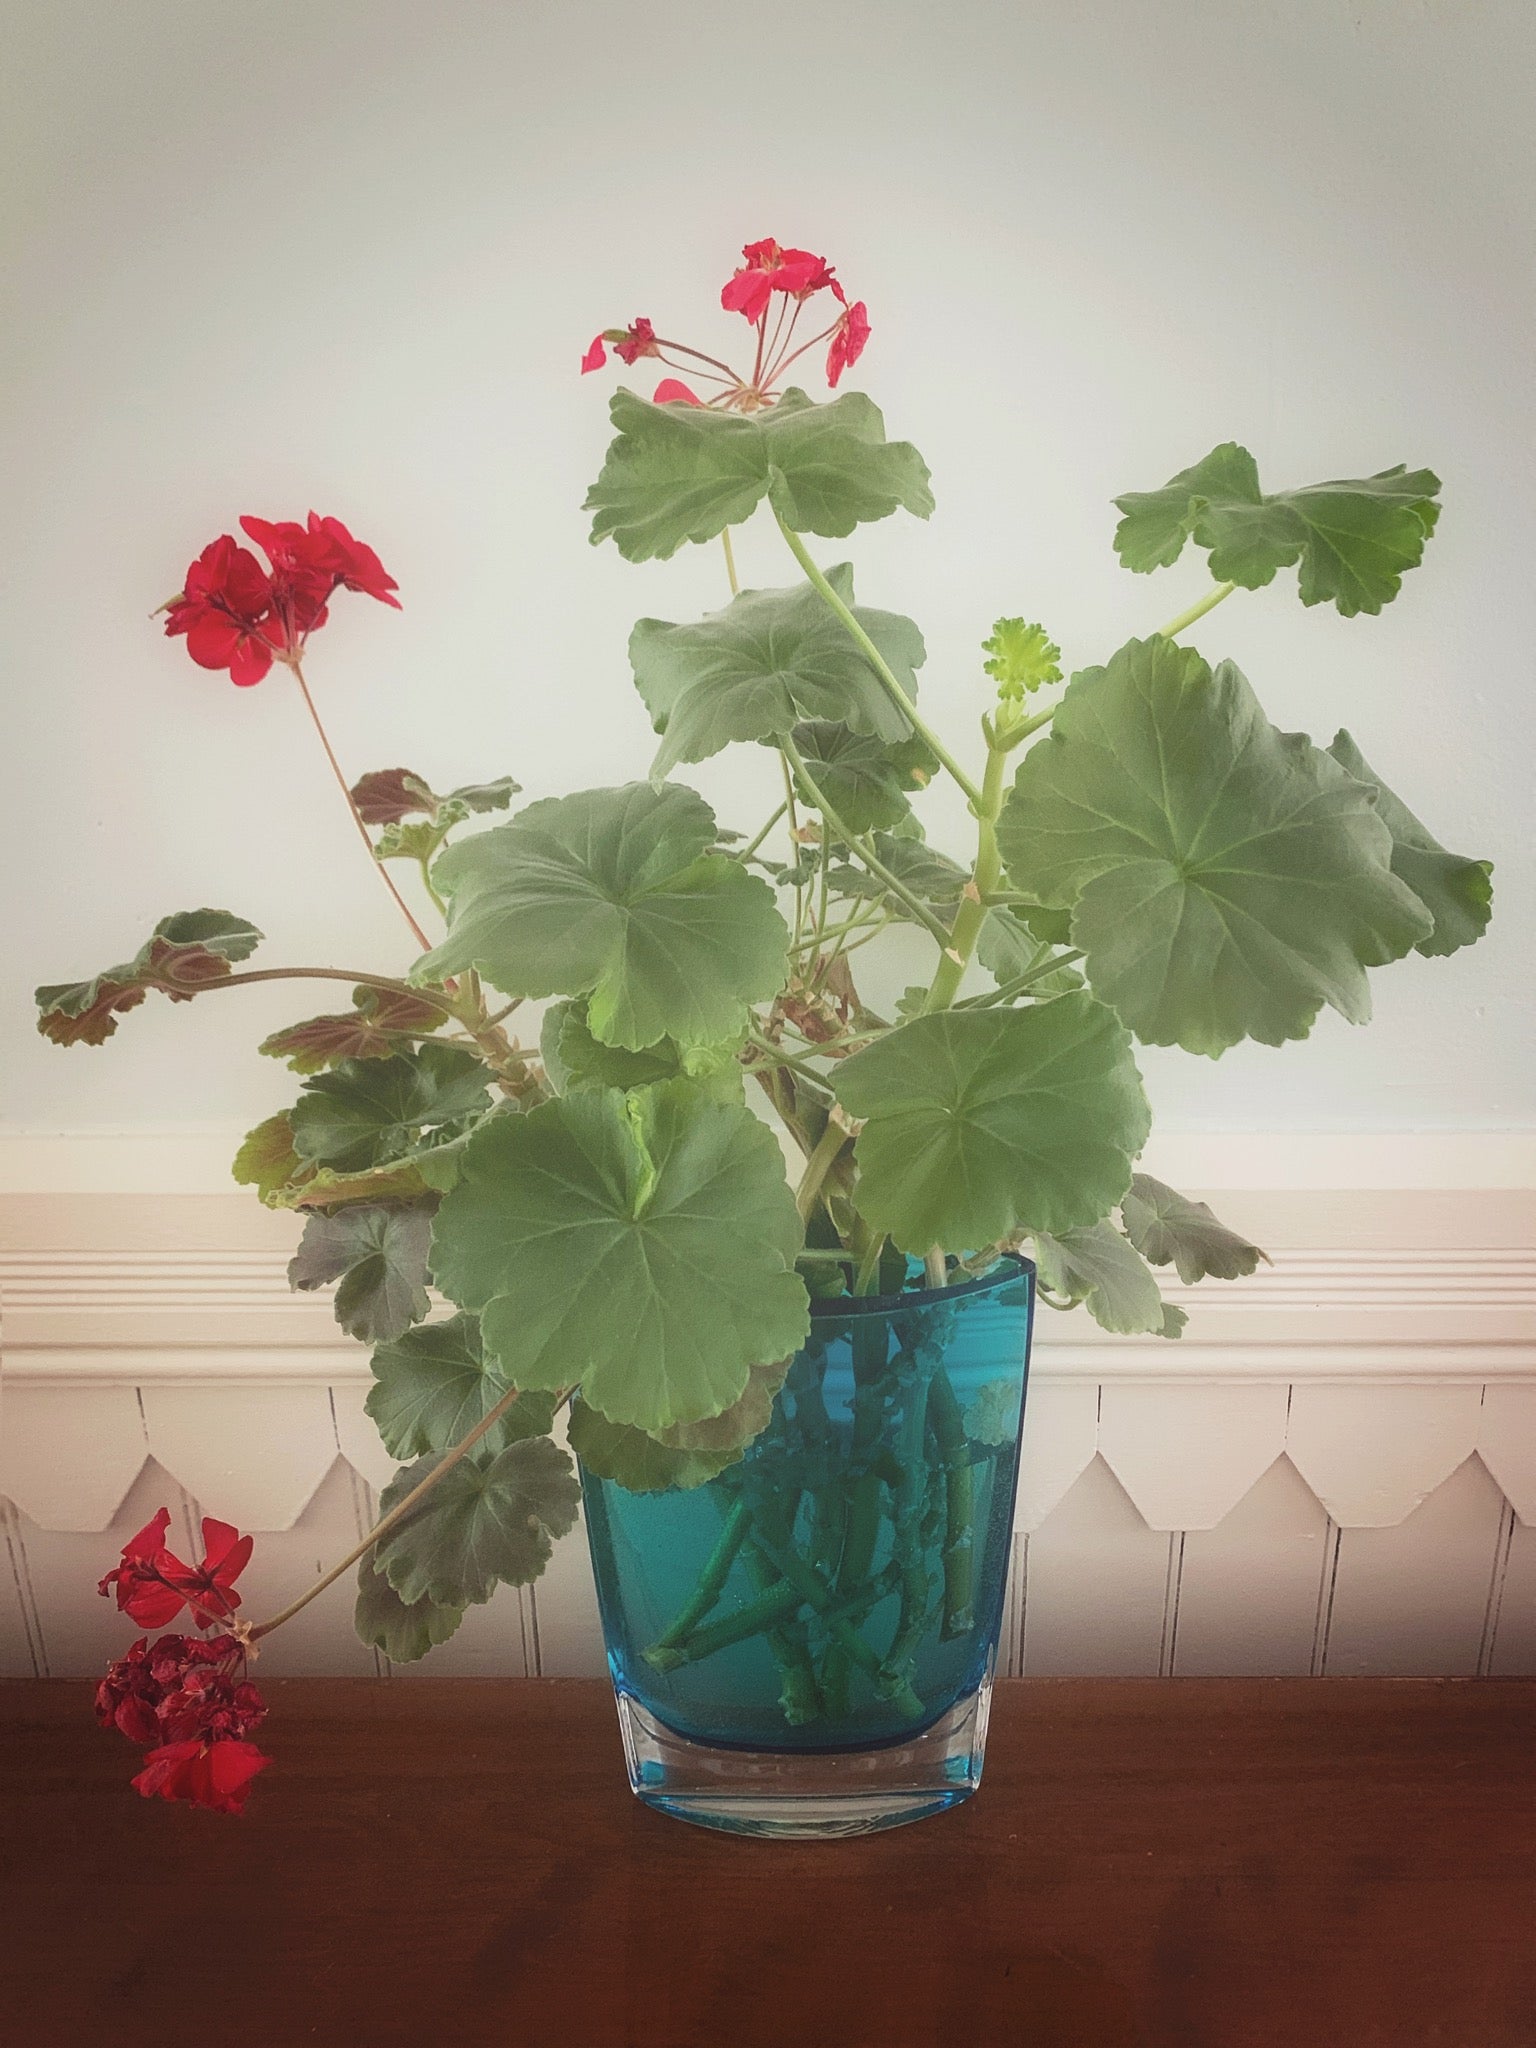 The cuttings from my old indoor geraniums.